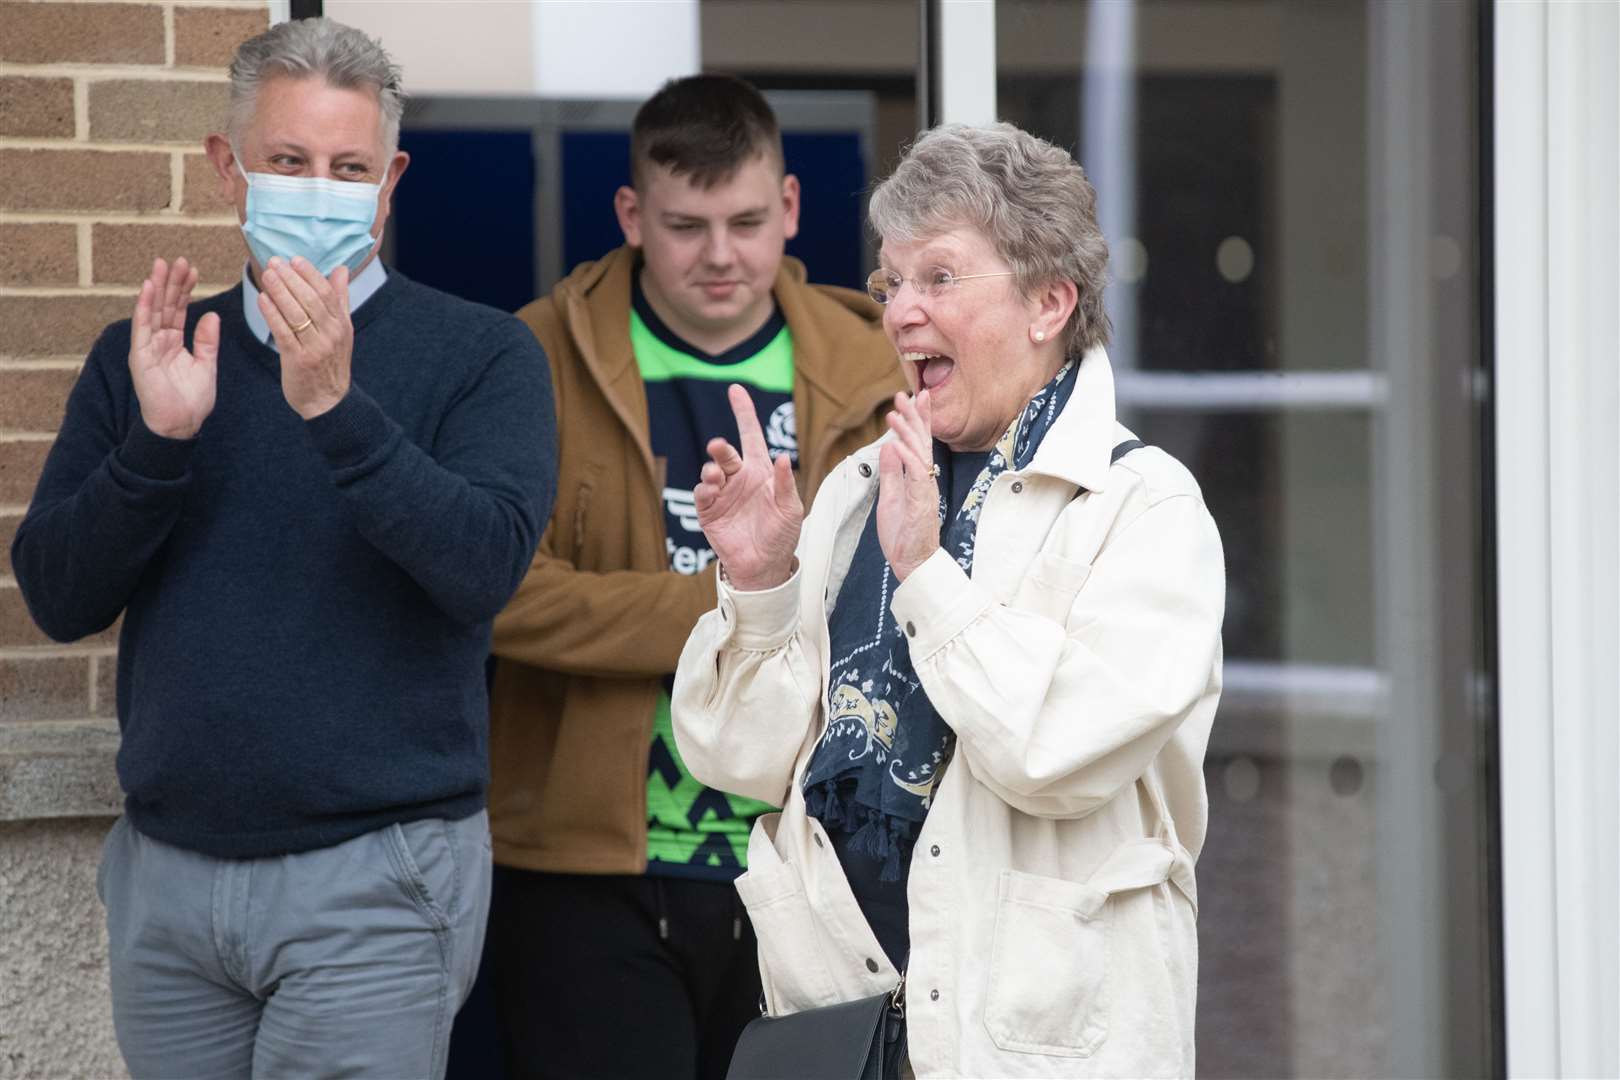 Surprise for Pat Emslie as she arrives at the John Swan Atrium for a surprise party to mark her retirement from The Gordon Schools in Huntly after 44 years of service. Picture: Daniel Forsyth.